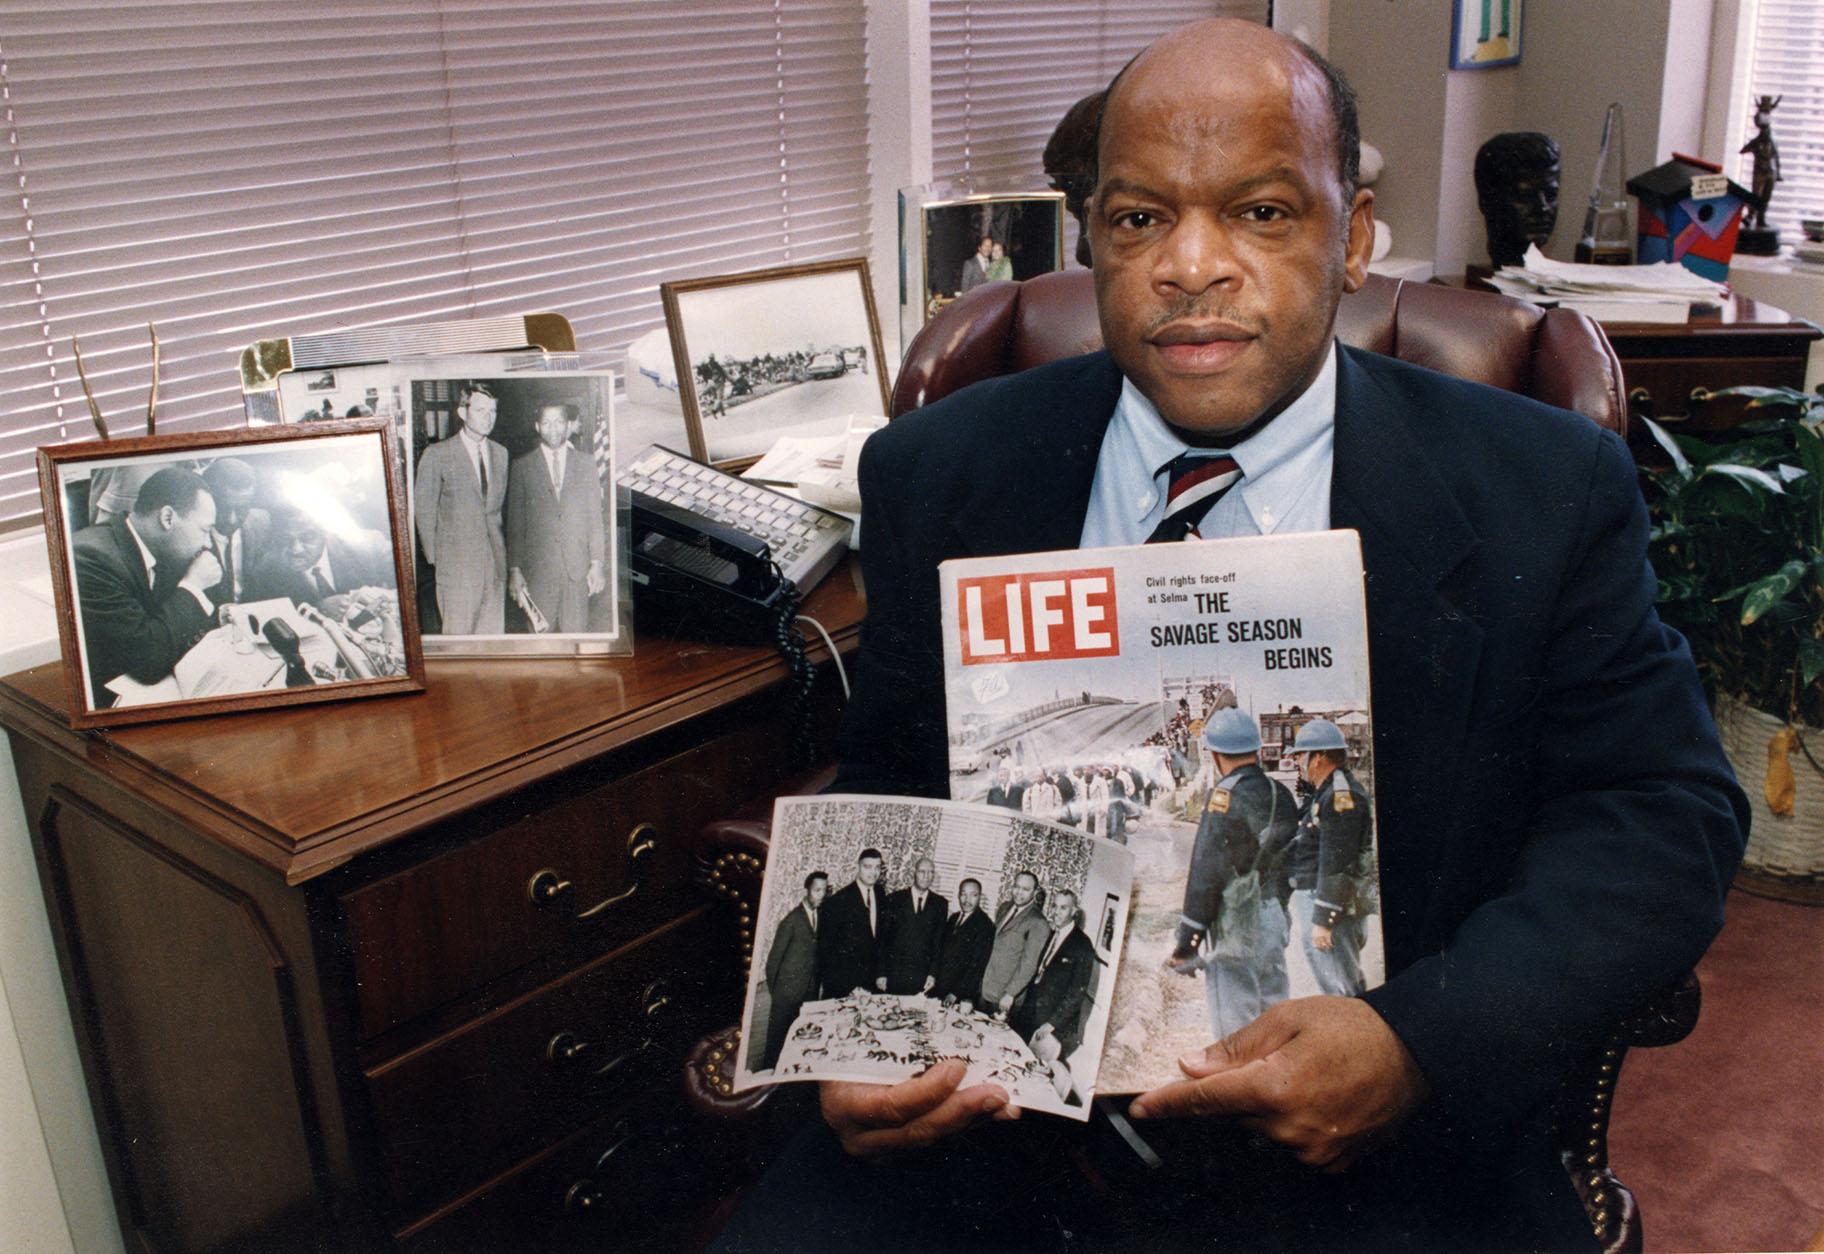 Congressman John Lewis is seen in his Atlanta office with two of his favorite items from his collection of memorabilia from his younger days as a civil rights activist in the 1960s. (Atlanta Journal-Constitution via AP)